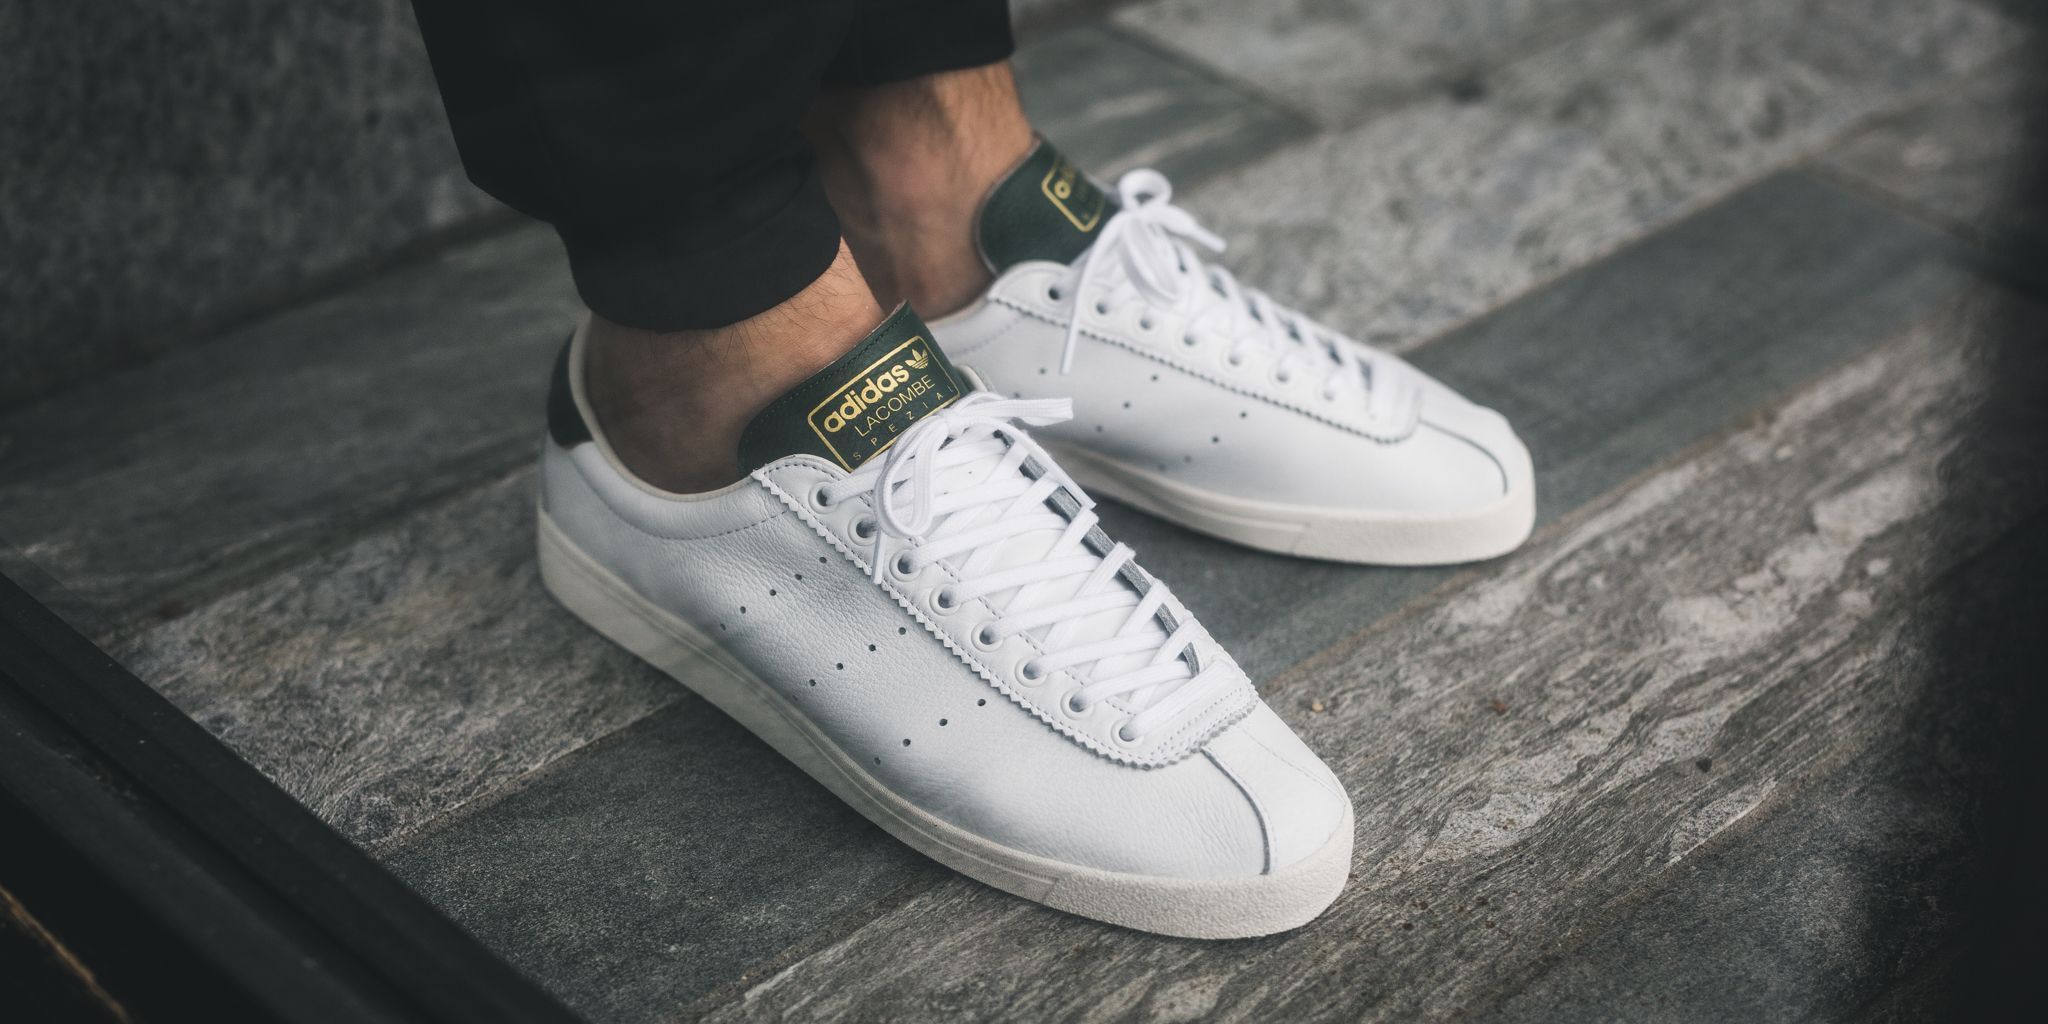 Titolo on Twitter: "ONLINE NOW 🎾 Adidas Lacombe #Spezial "White" SHOP HERE https://t.co/lC6pgZBmc4 #adidasSPEZIAL #adidas #lacombe https://t.co/QYwOTQsqm3" /